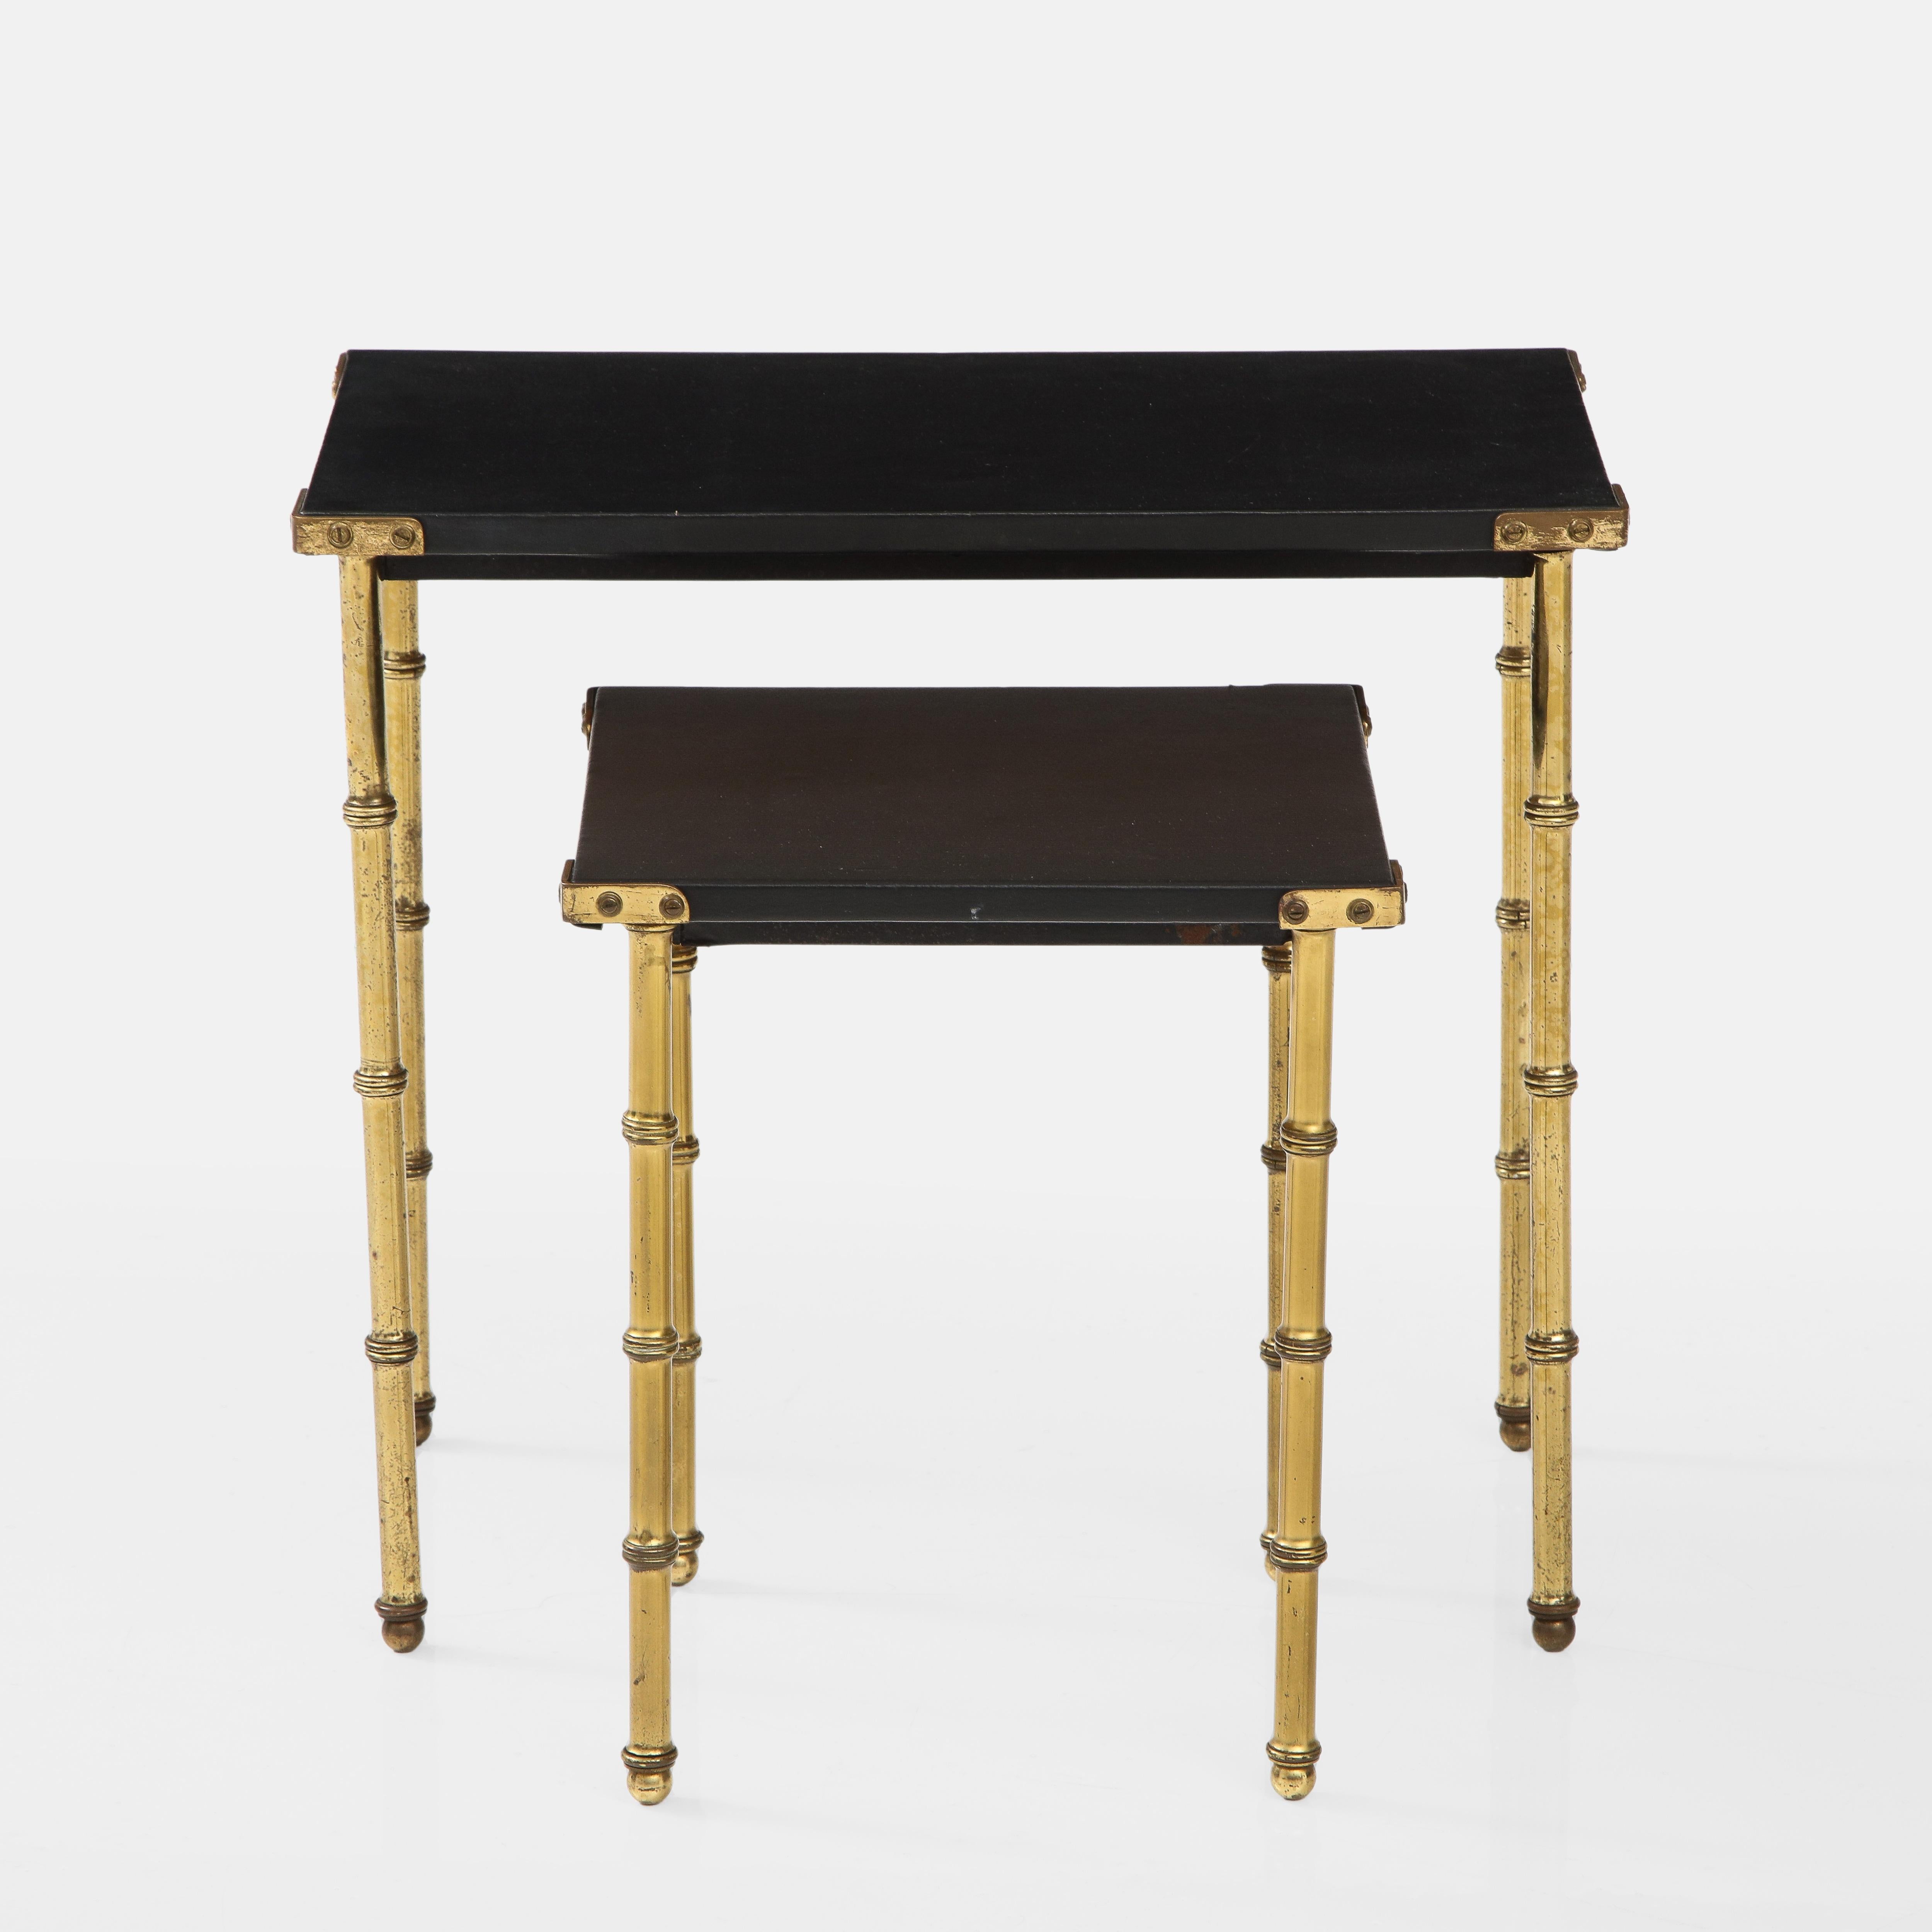 Jaques Adnet original set of faux bamboo side nesting tables with tops wrapped in original black skaï and faux bamboo brass legs. These side or end nesting tables have remained in completely original and very good condition and are free of tears or